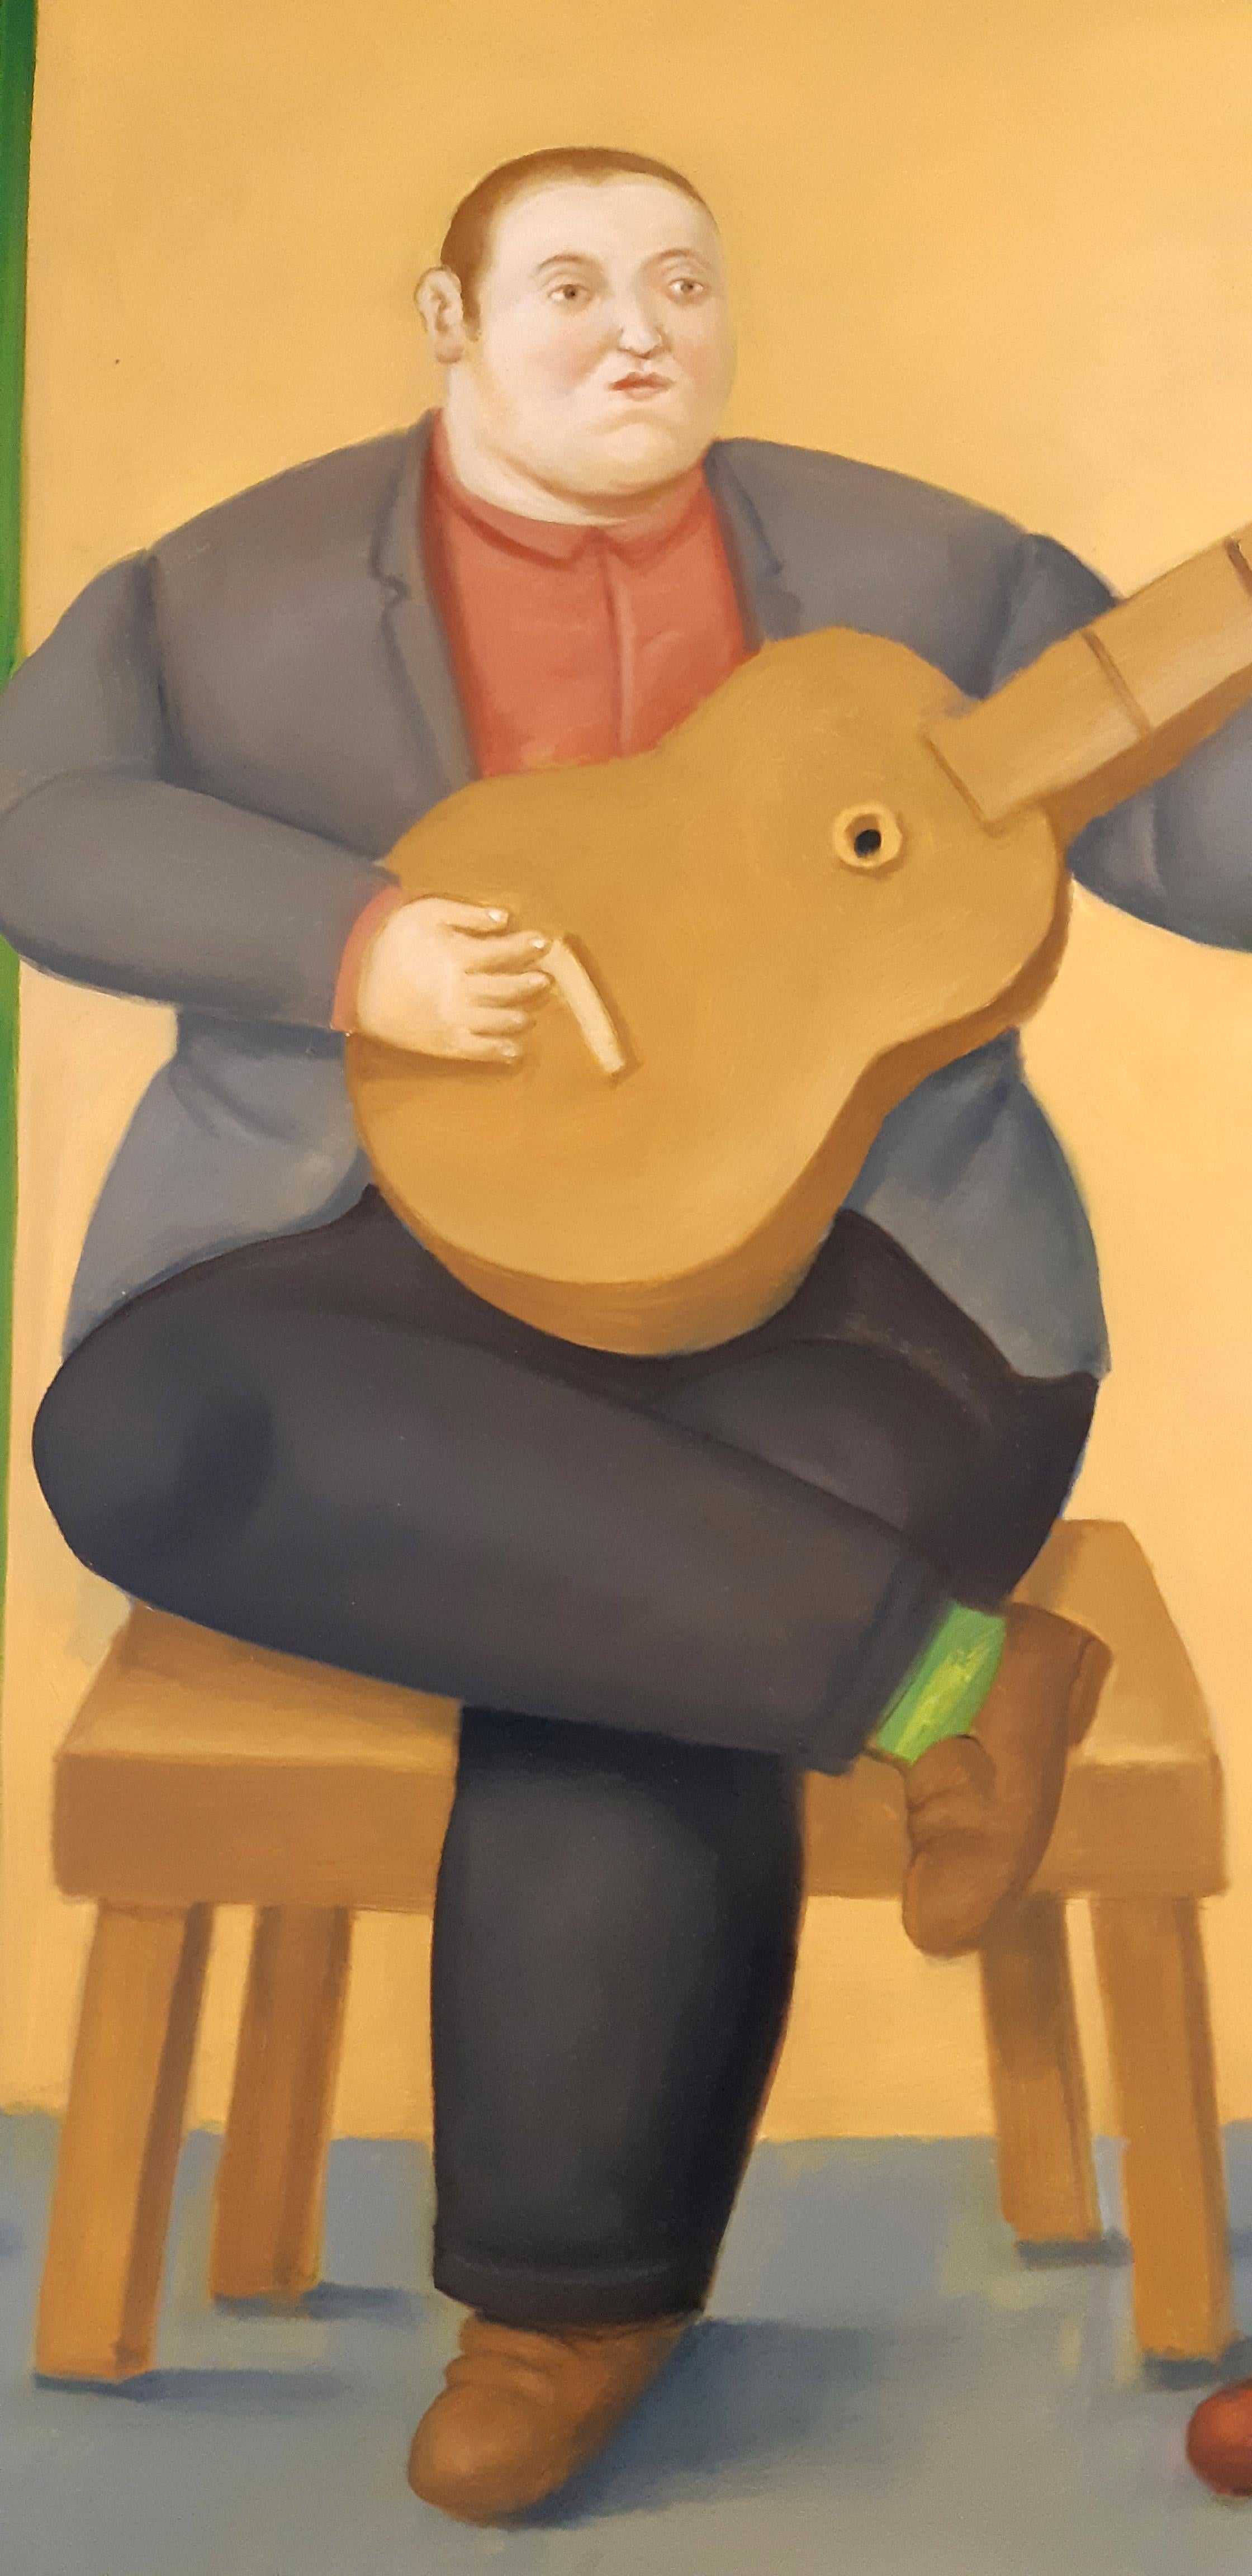 Fernando Botero
Musici, 2019
Oil on canvas
88 x 81 cm  34.6 x 31.8 in.
Signed and dated 'Botero 19' (lower right)

The work is in mint condition and is accompanied with the certificate of authenticity.

Born in 1932 in Medellín, Colombia, Fernando